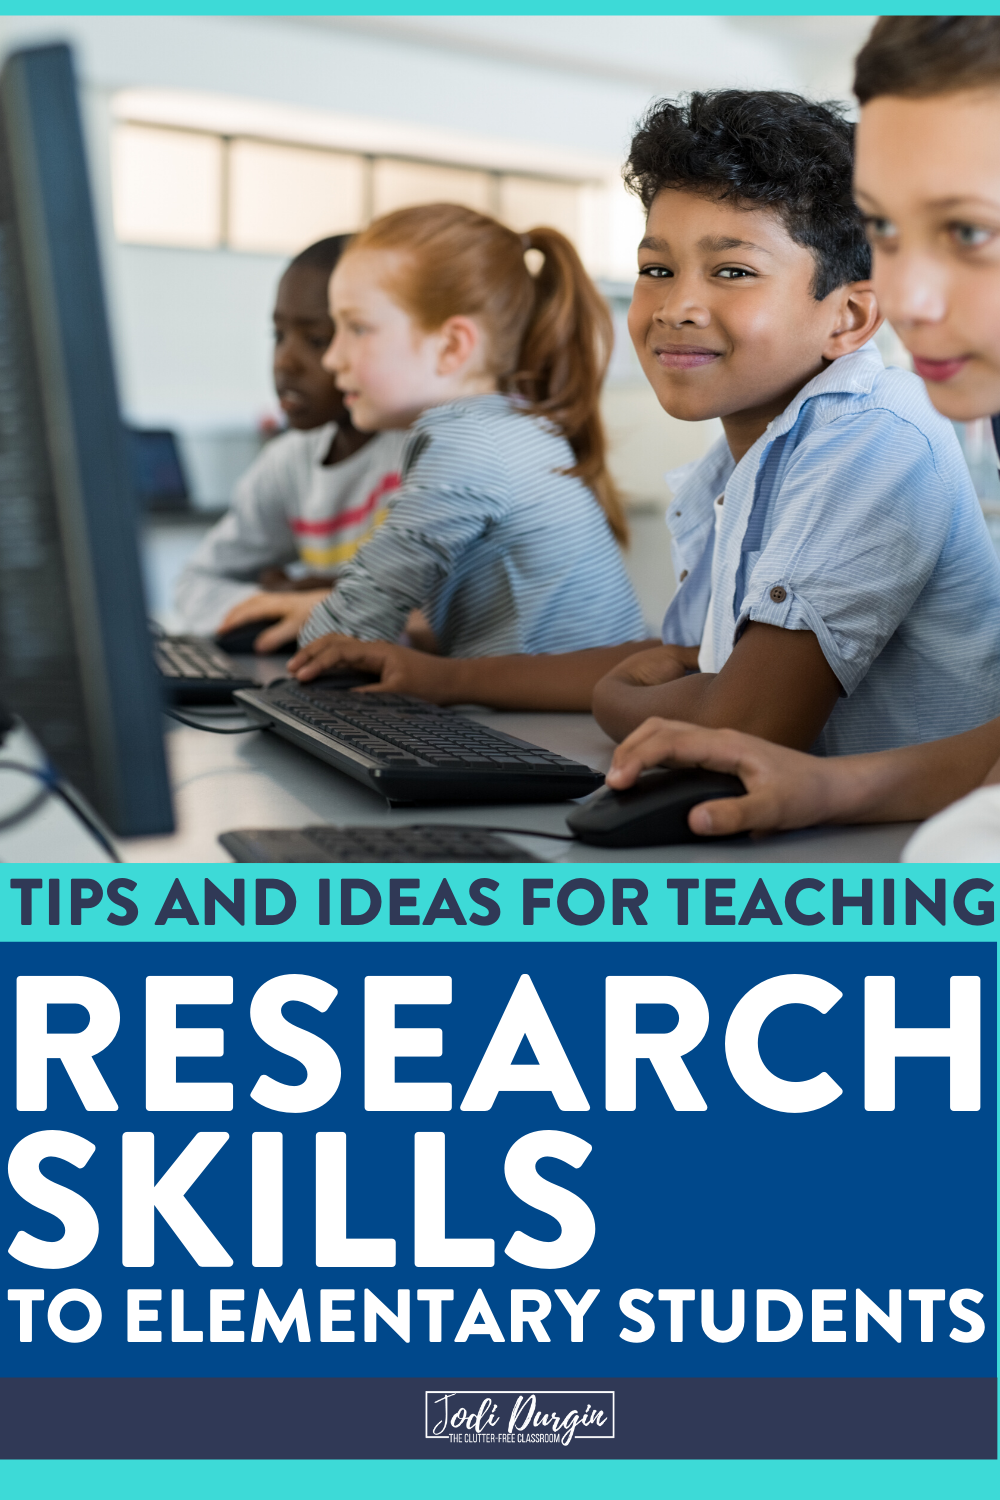 research skills elementary students